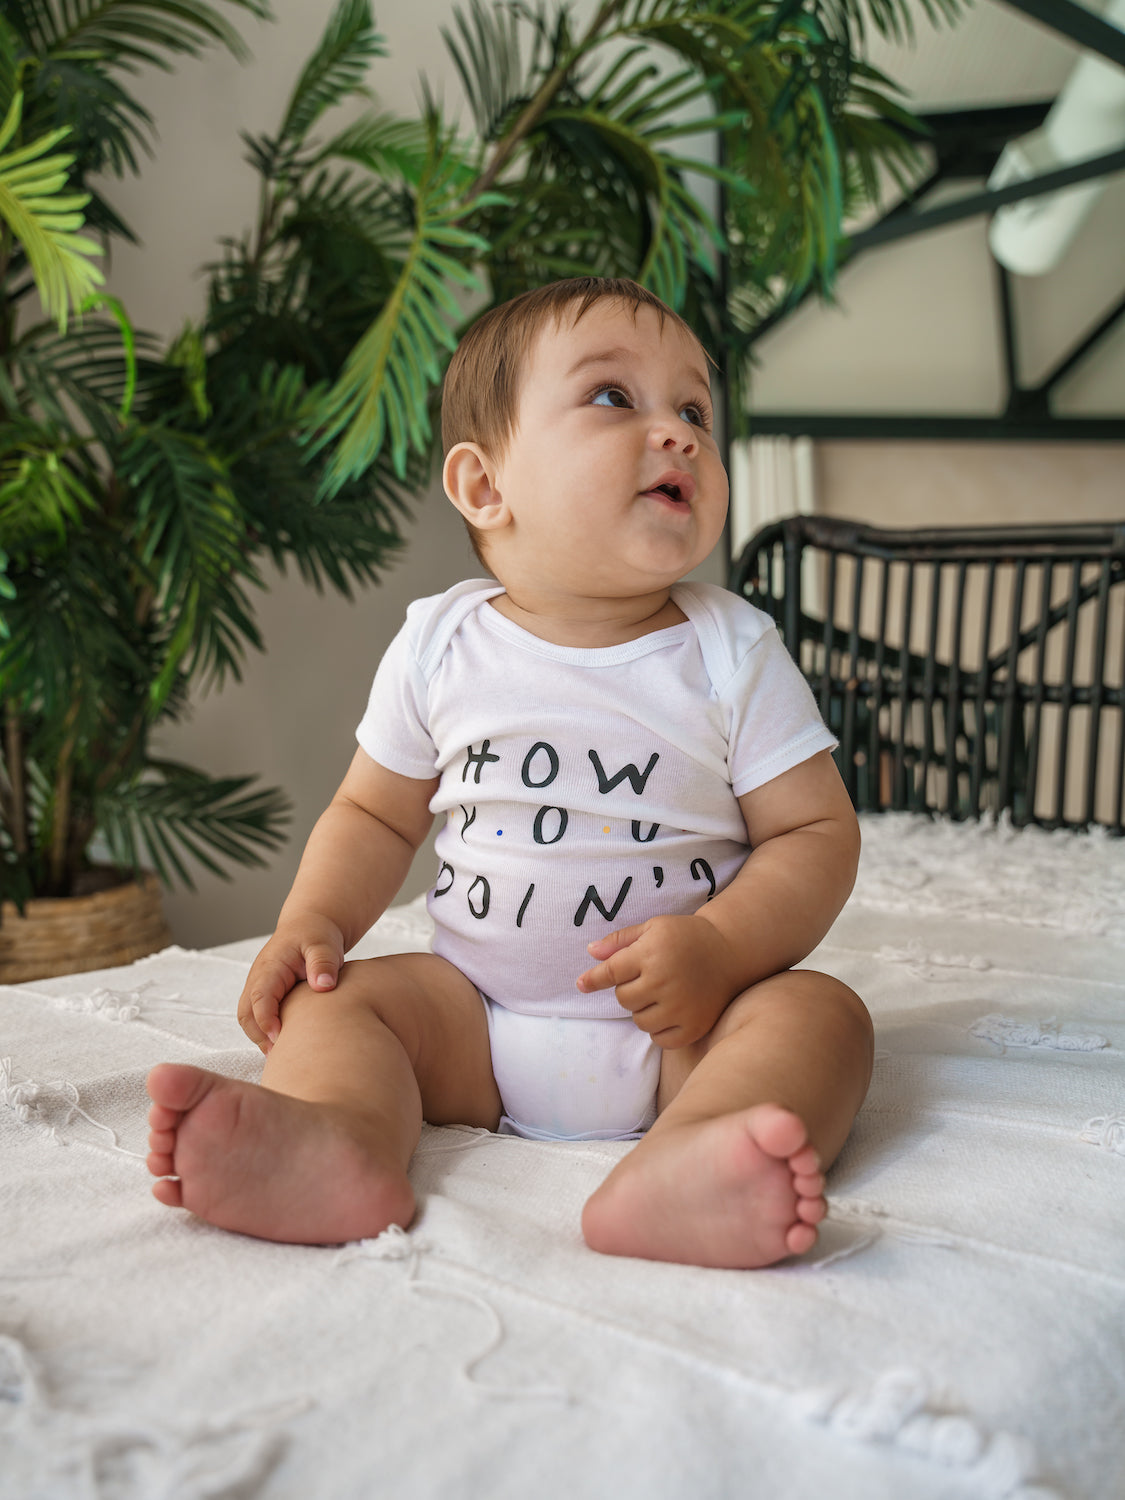 How You Doin'? FRIENDS Inspired Baby Onesie®